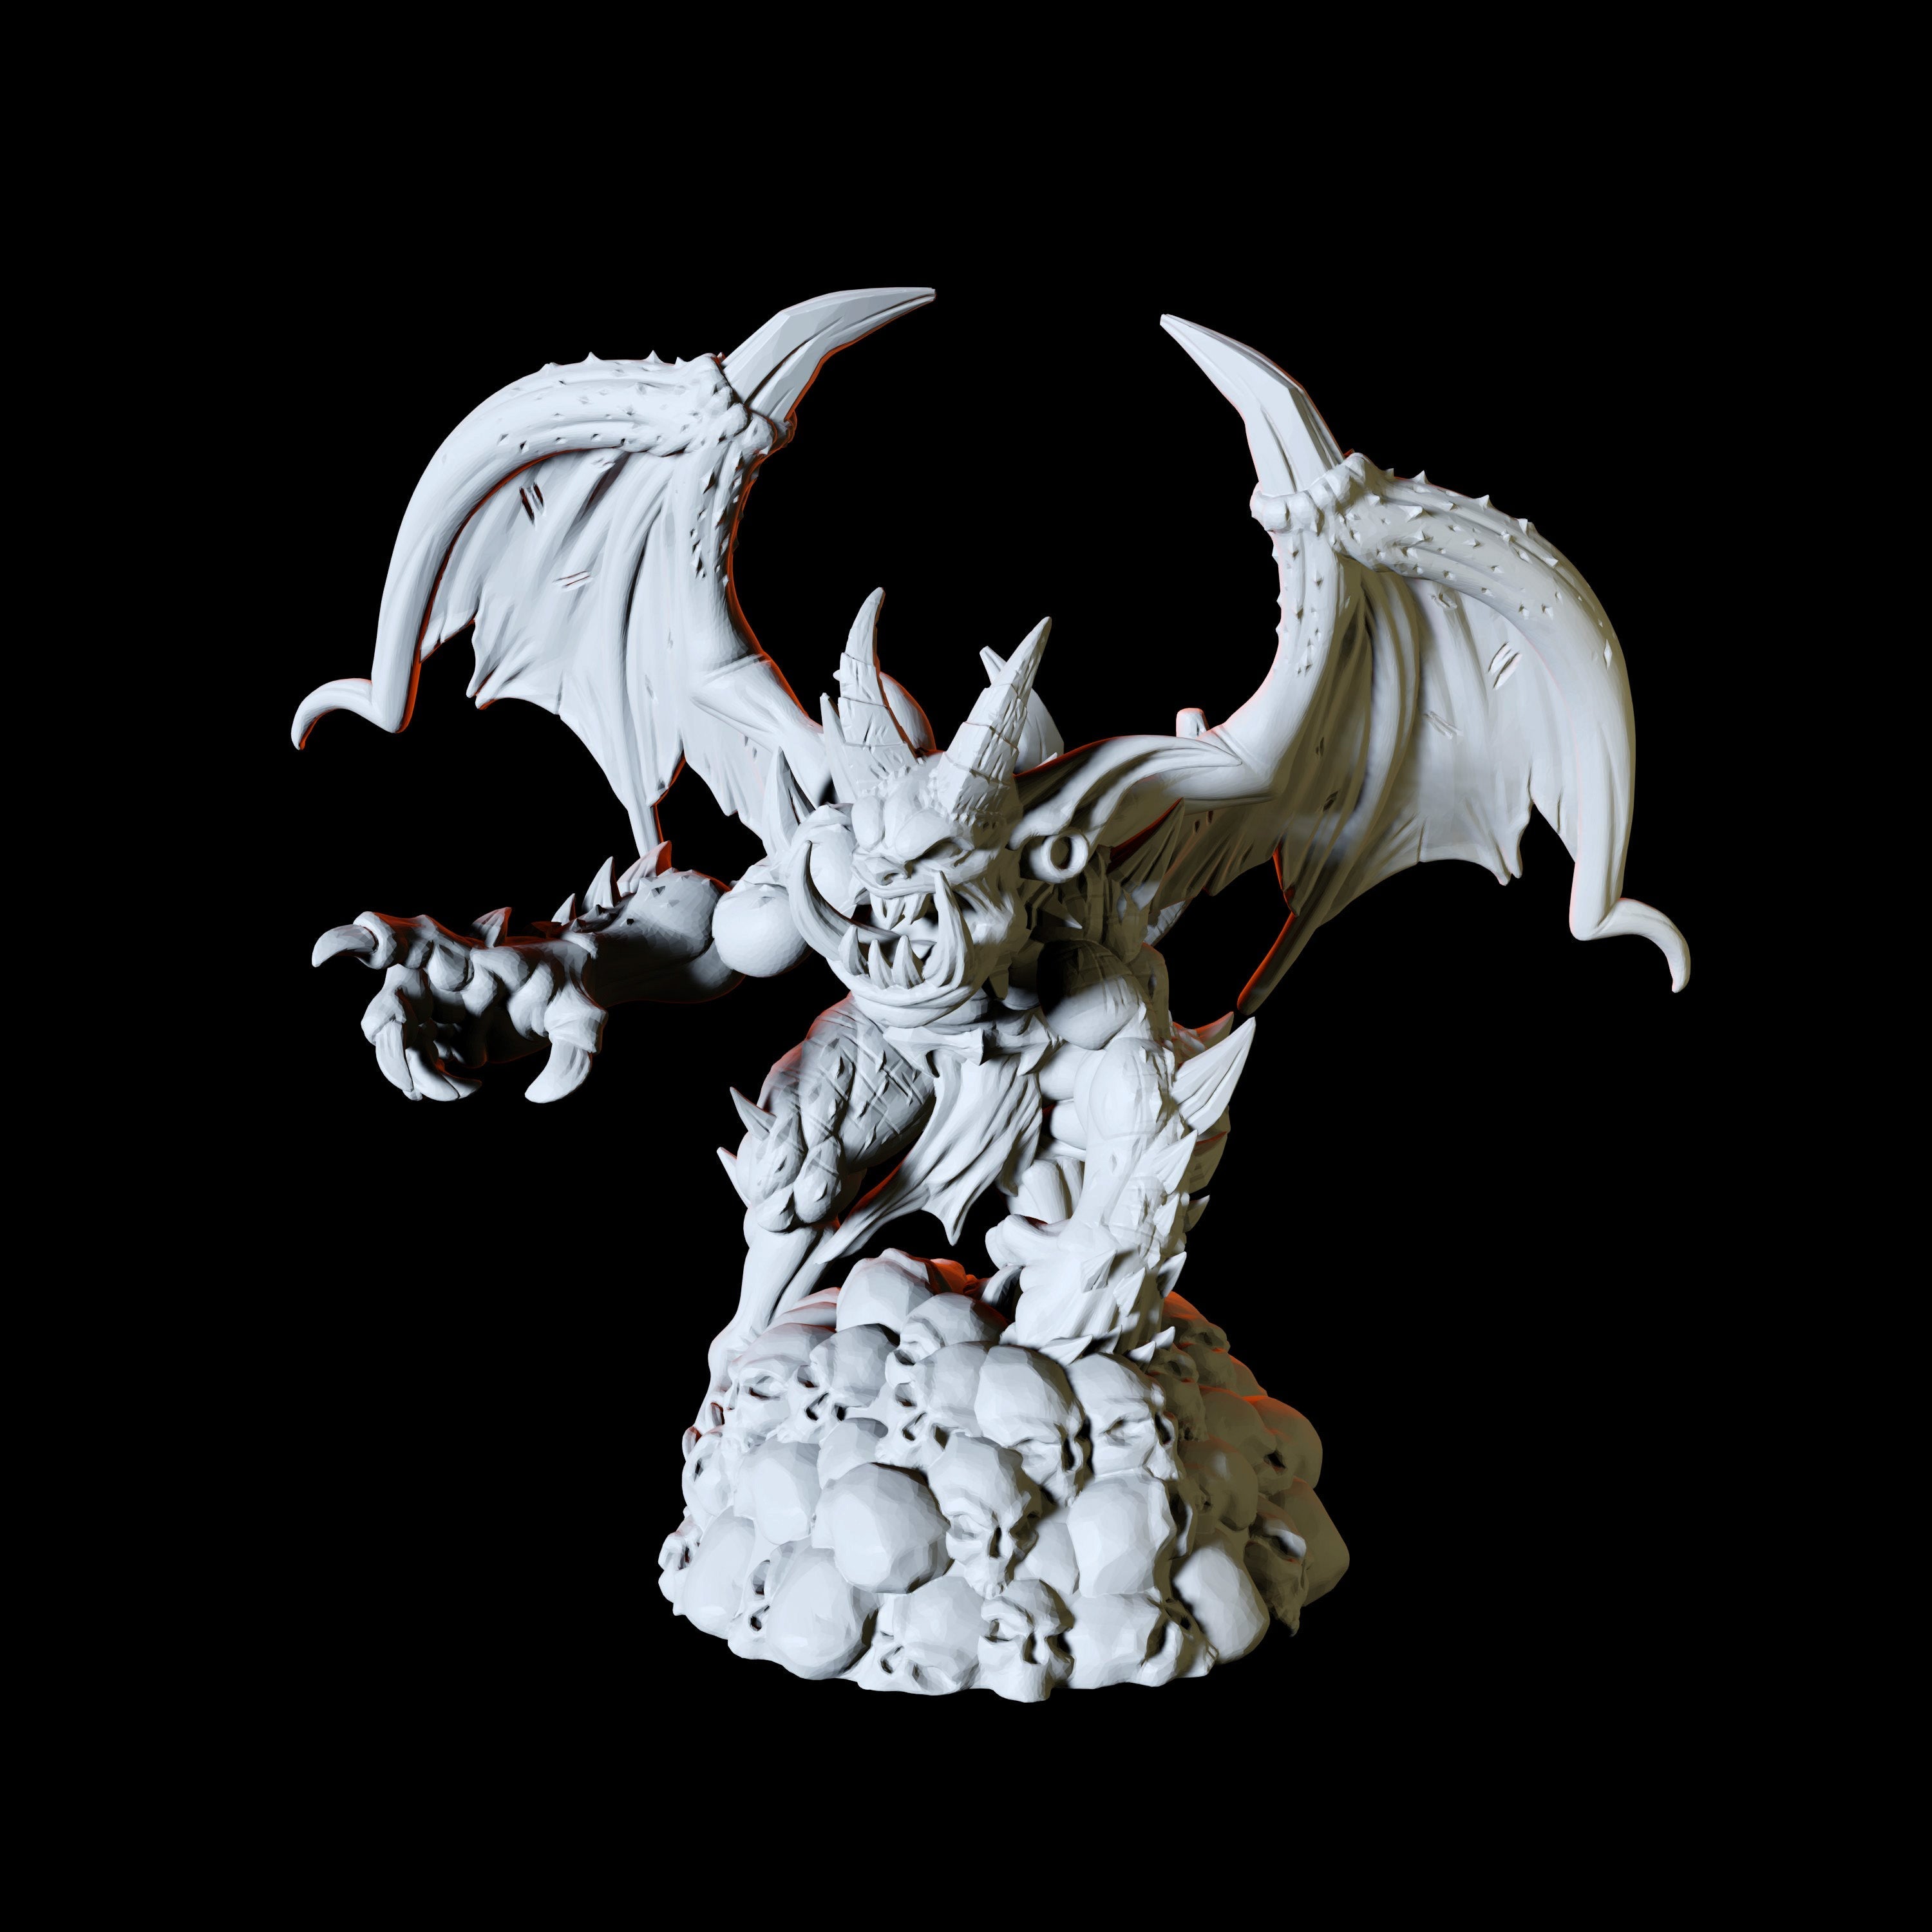 Imp Miniature for Dungeons and Dragons - Myth Forged